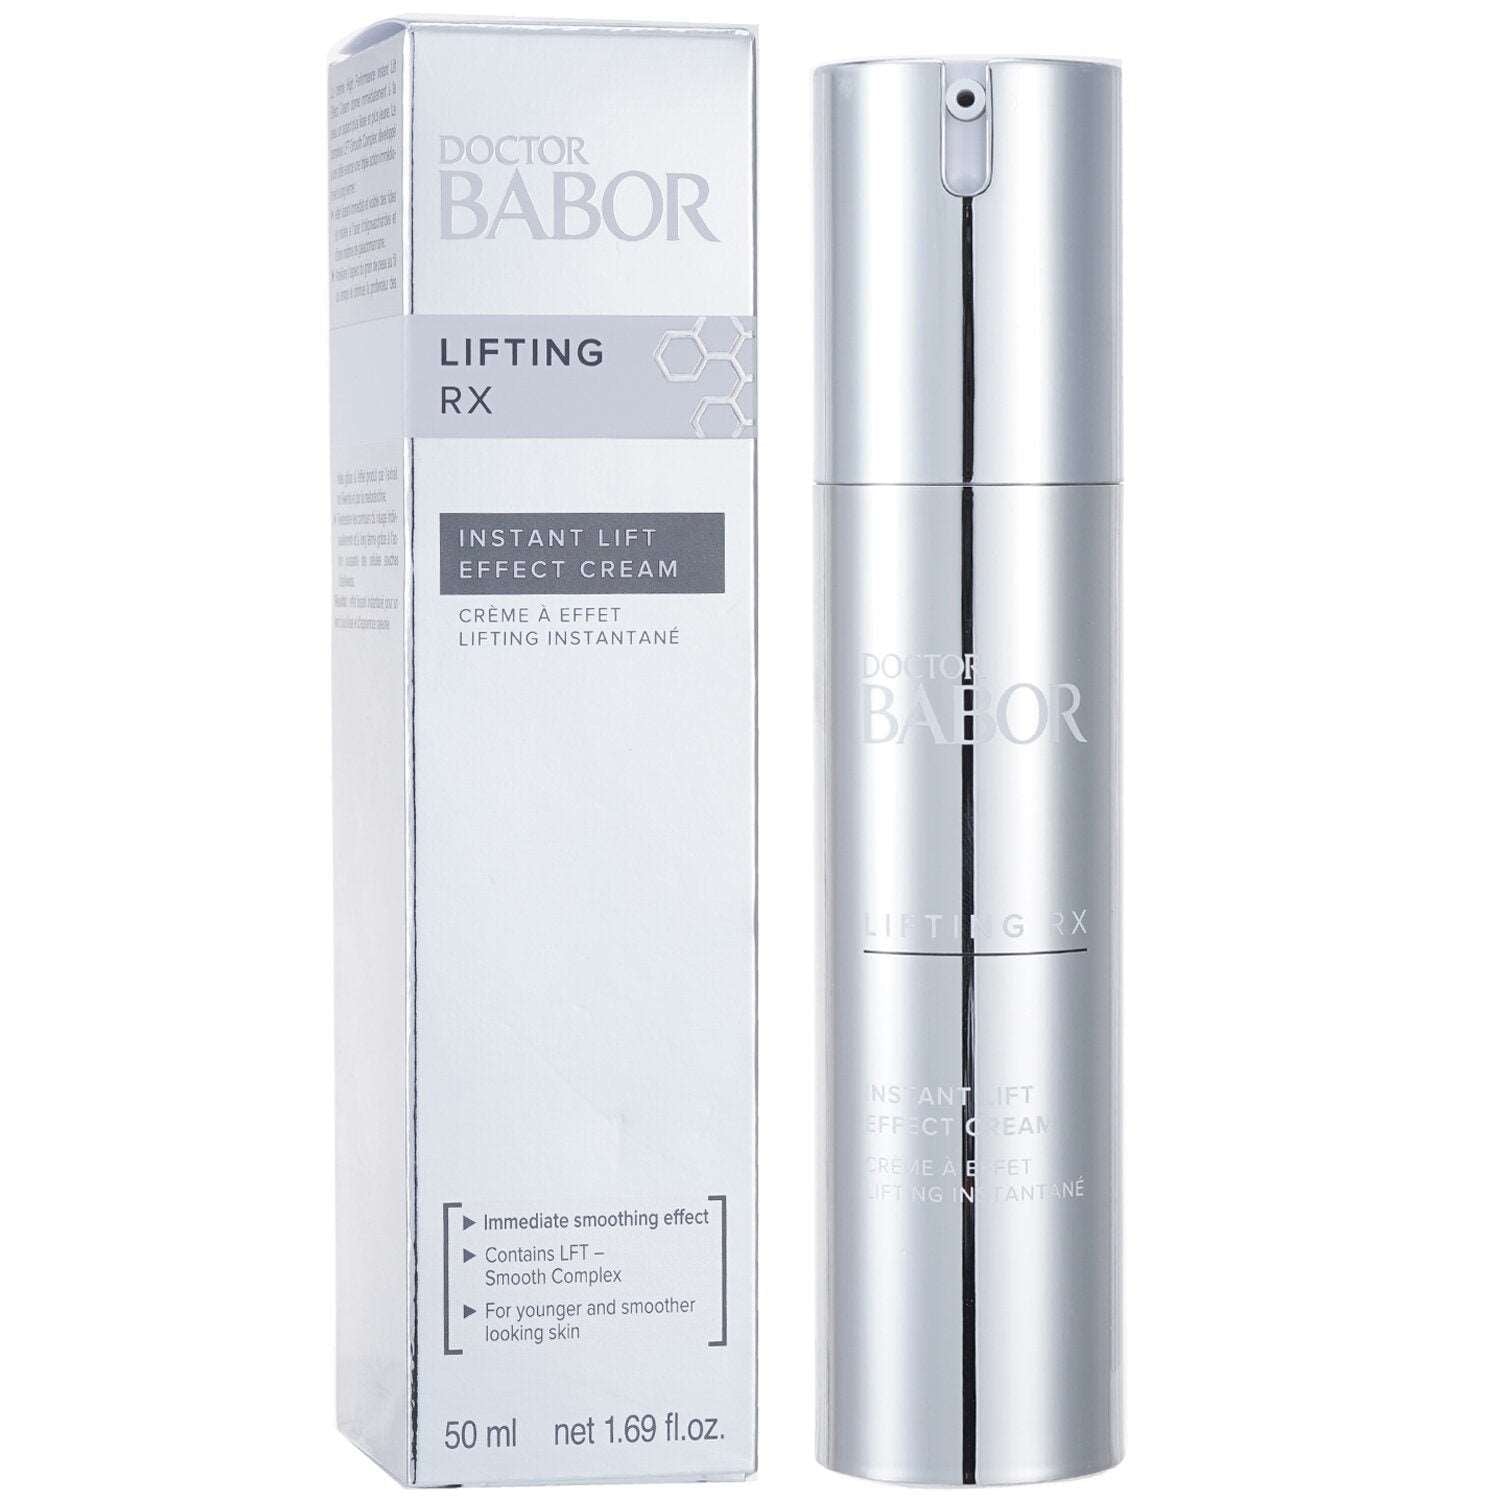 BABOR - Doctor Babor Lifting Rx Instant Lift Effect Cream - 50ml/1.69oz 3P's Inclusive Beauty